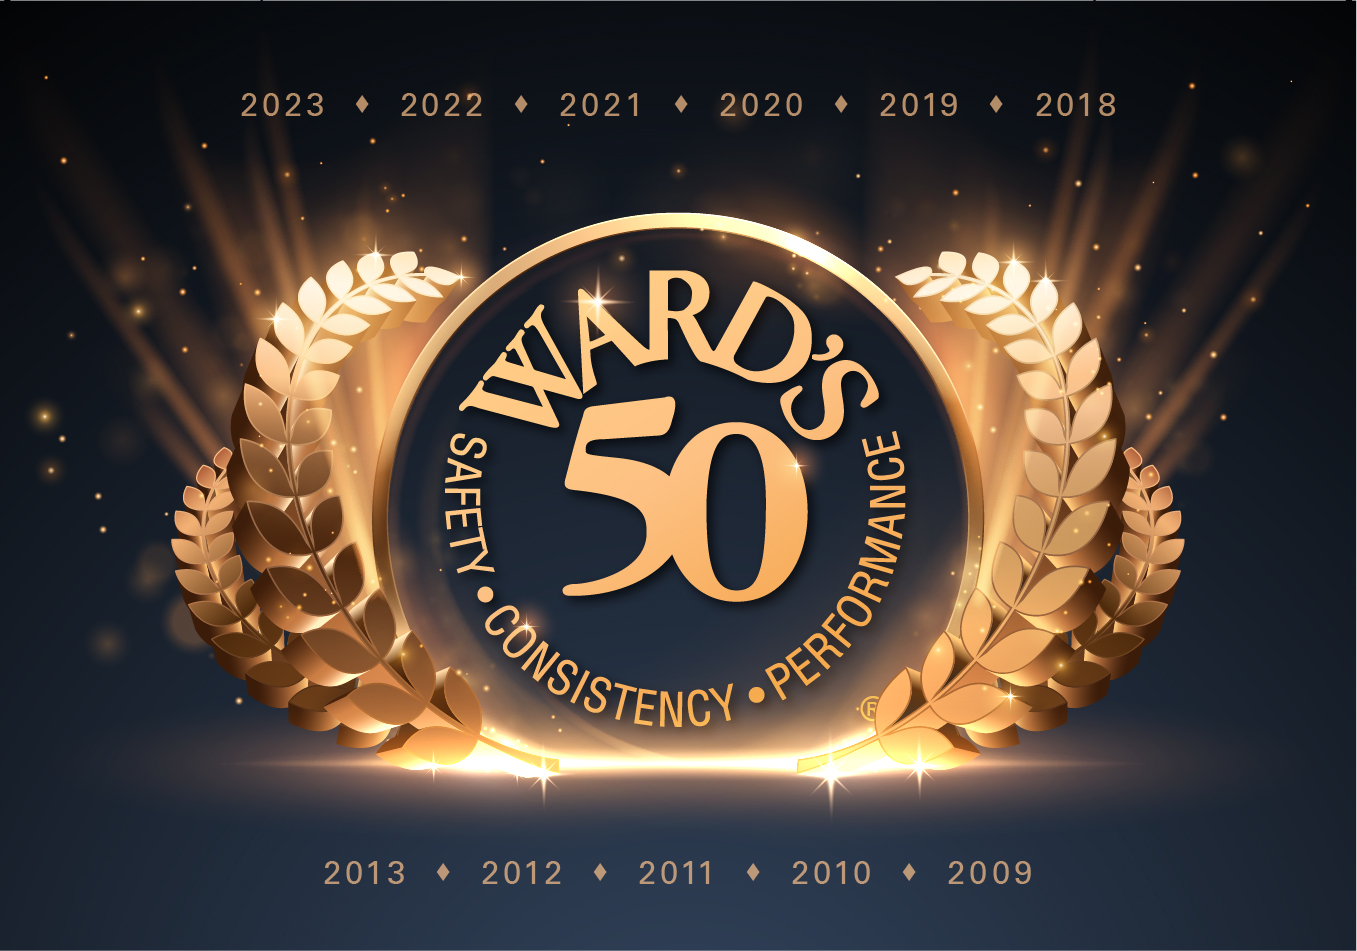 Ward's 50. Safety. Consistency. Performance.